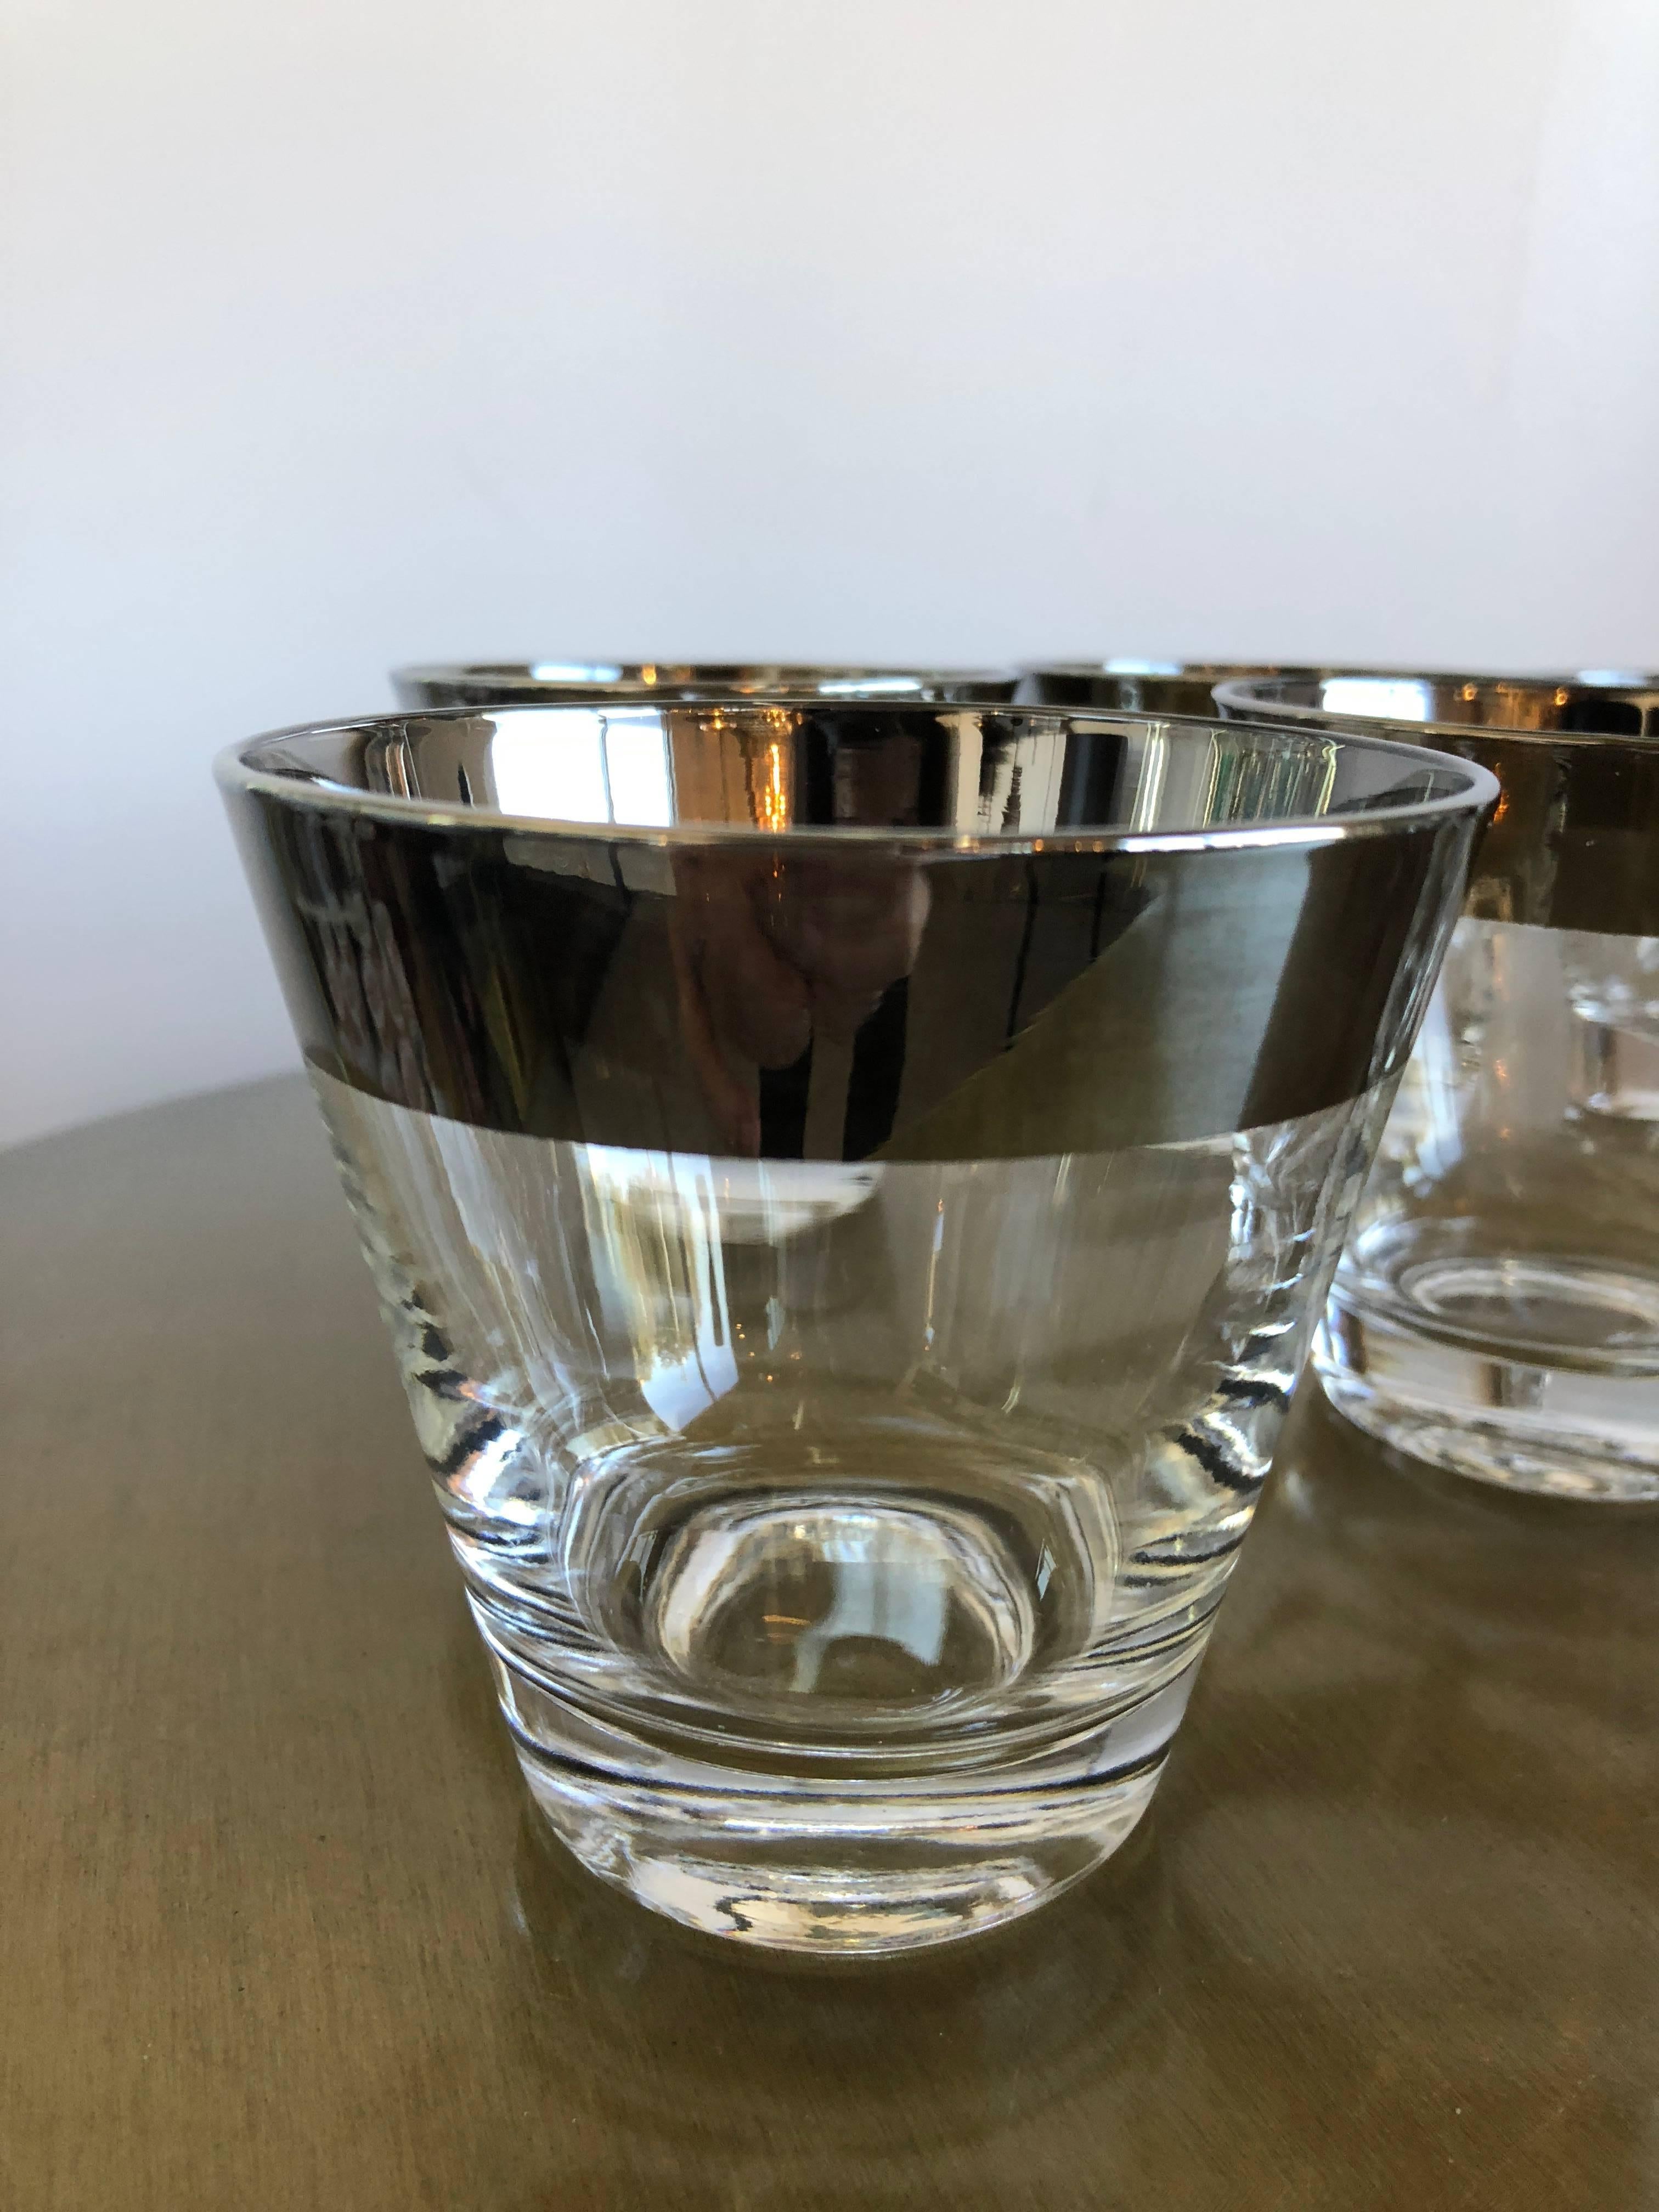 Offered is a pristine mid century modern set of seven Dorothy Thorpe silver overlay whiskey cocktail glasses.

Dorothy Thorpe glassware was a chic staple of every mid-century modern wet bar, particularly her festive Roly Poly silver-banded tumblers.